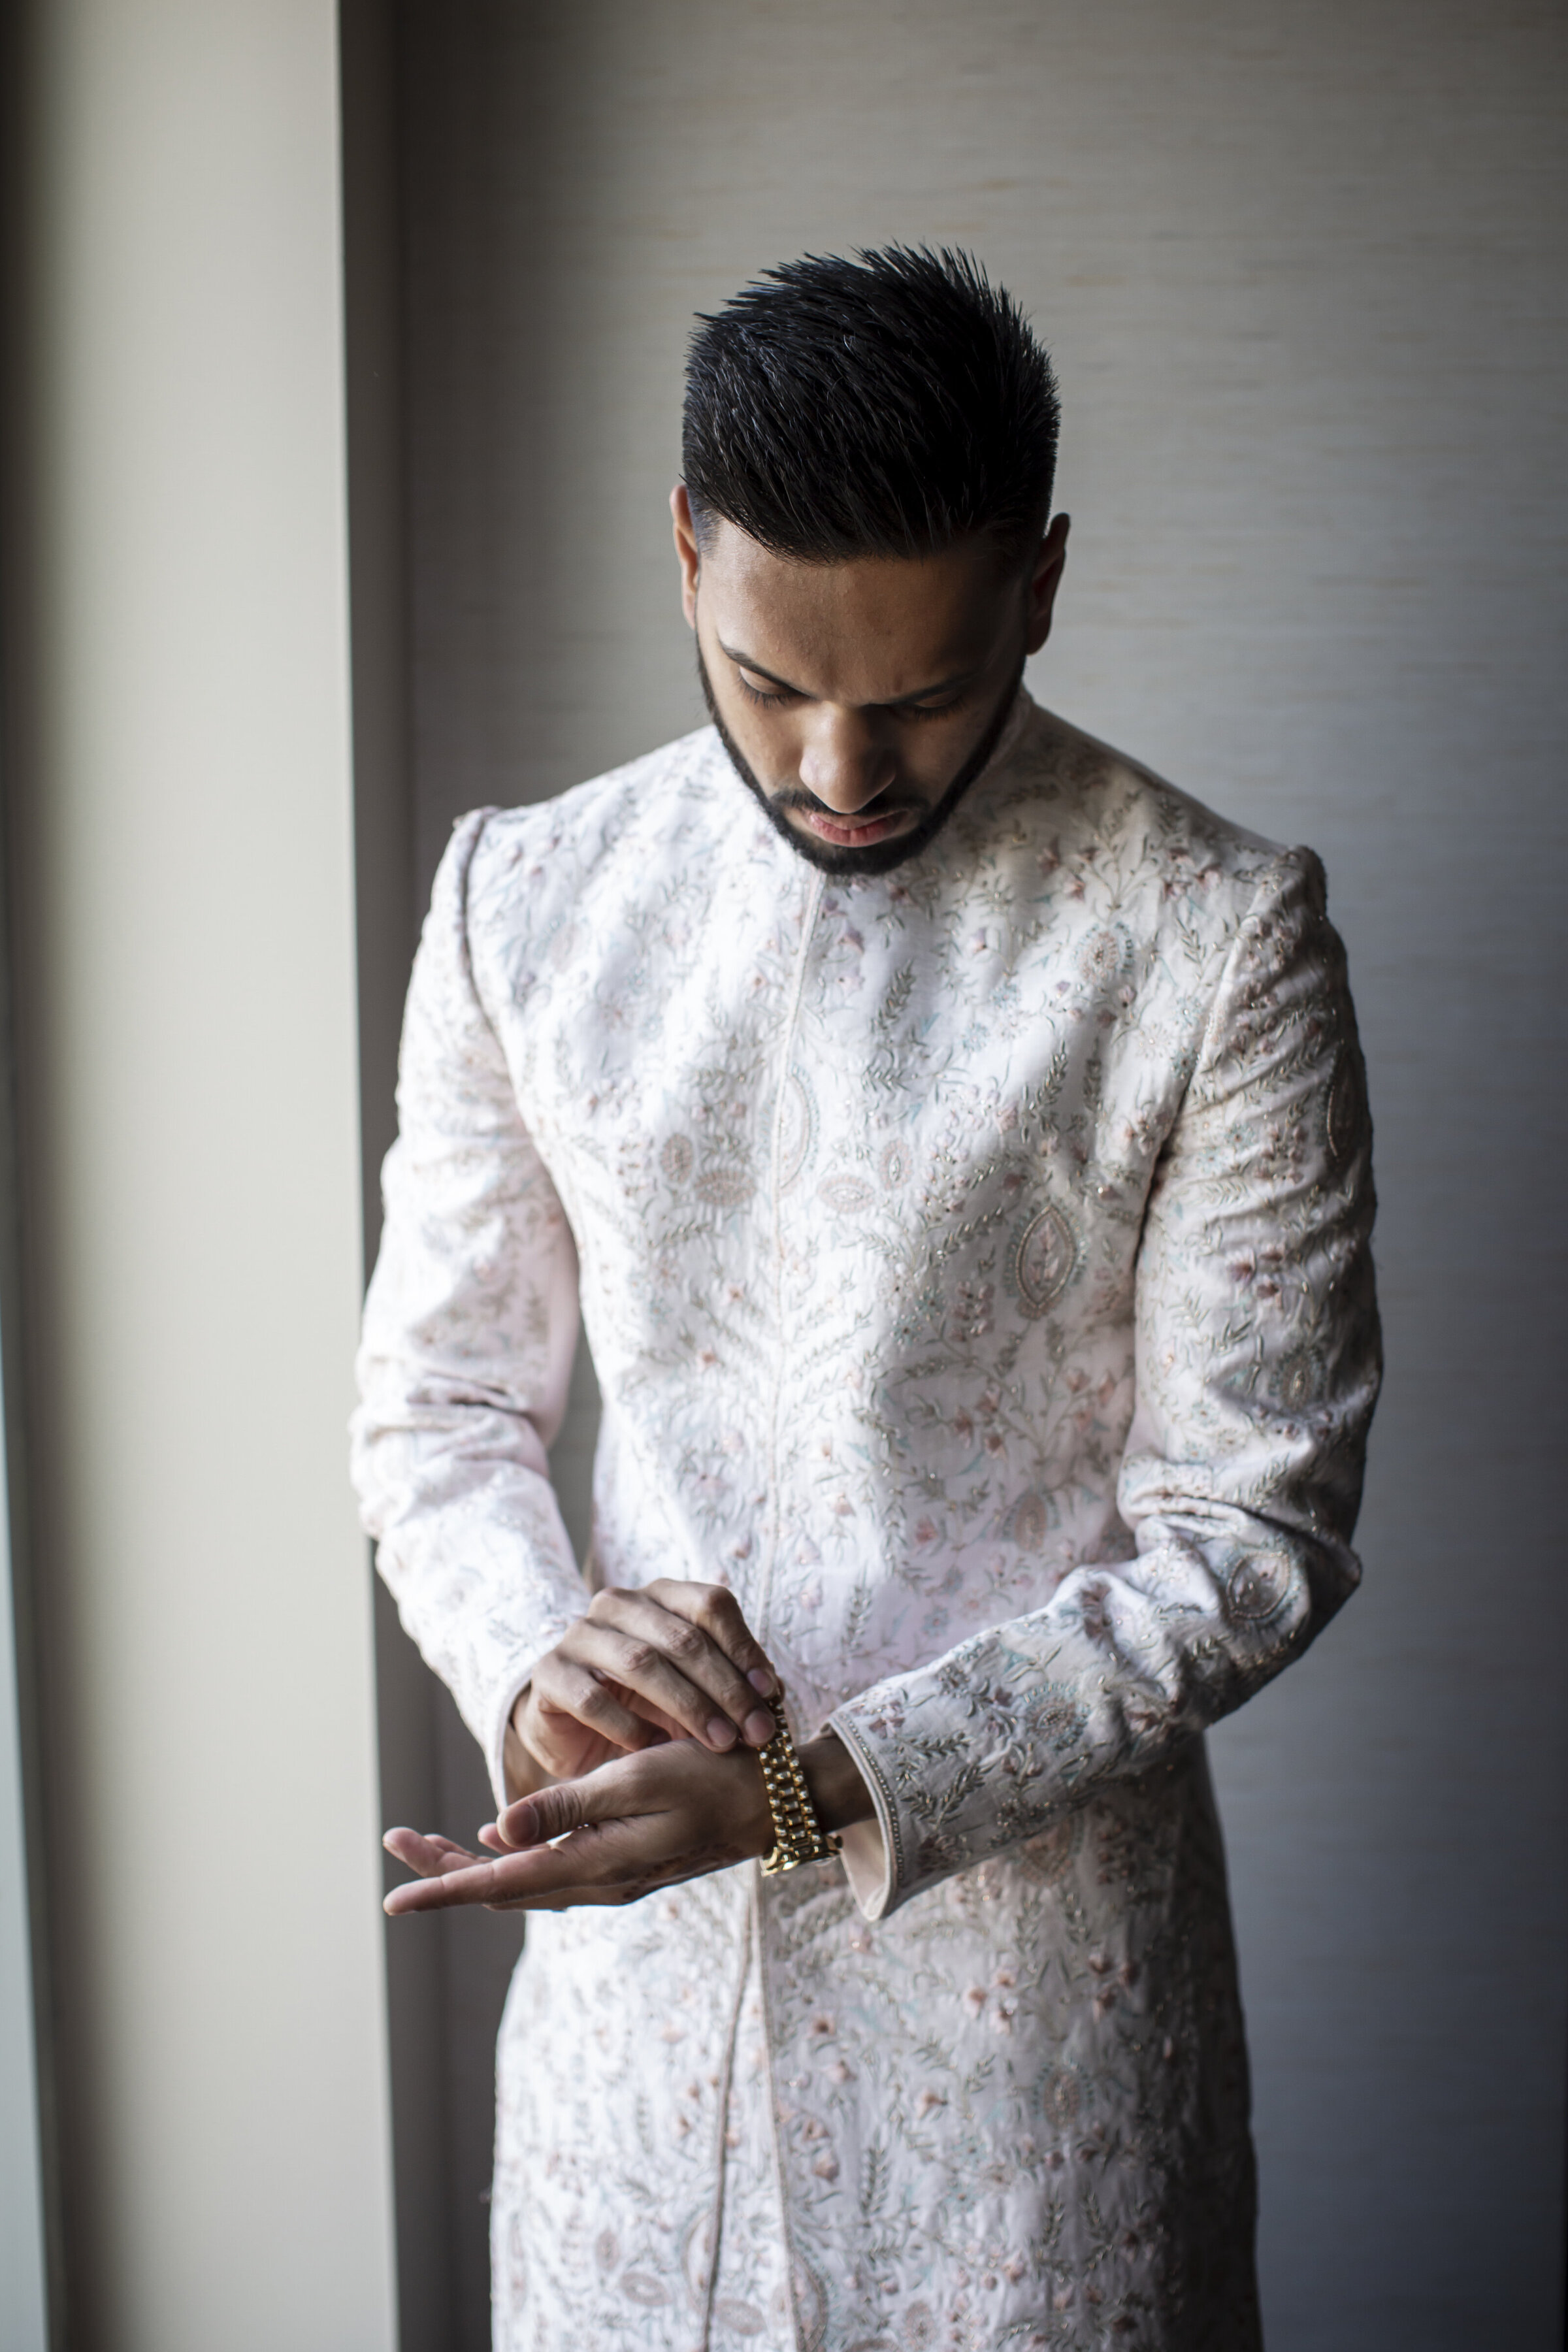 Indian groom putting on watch.